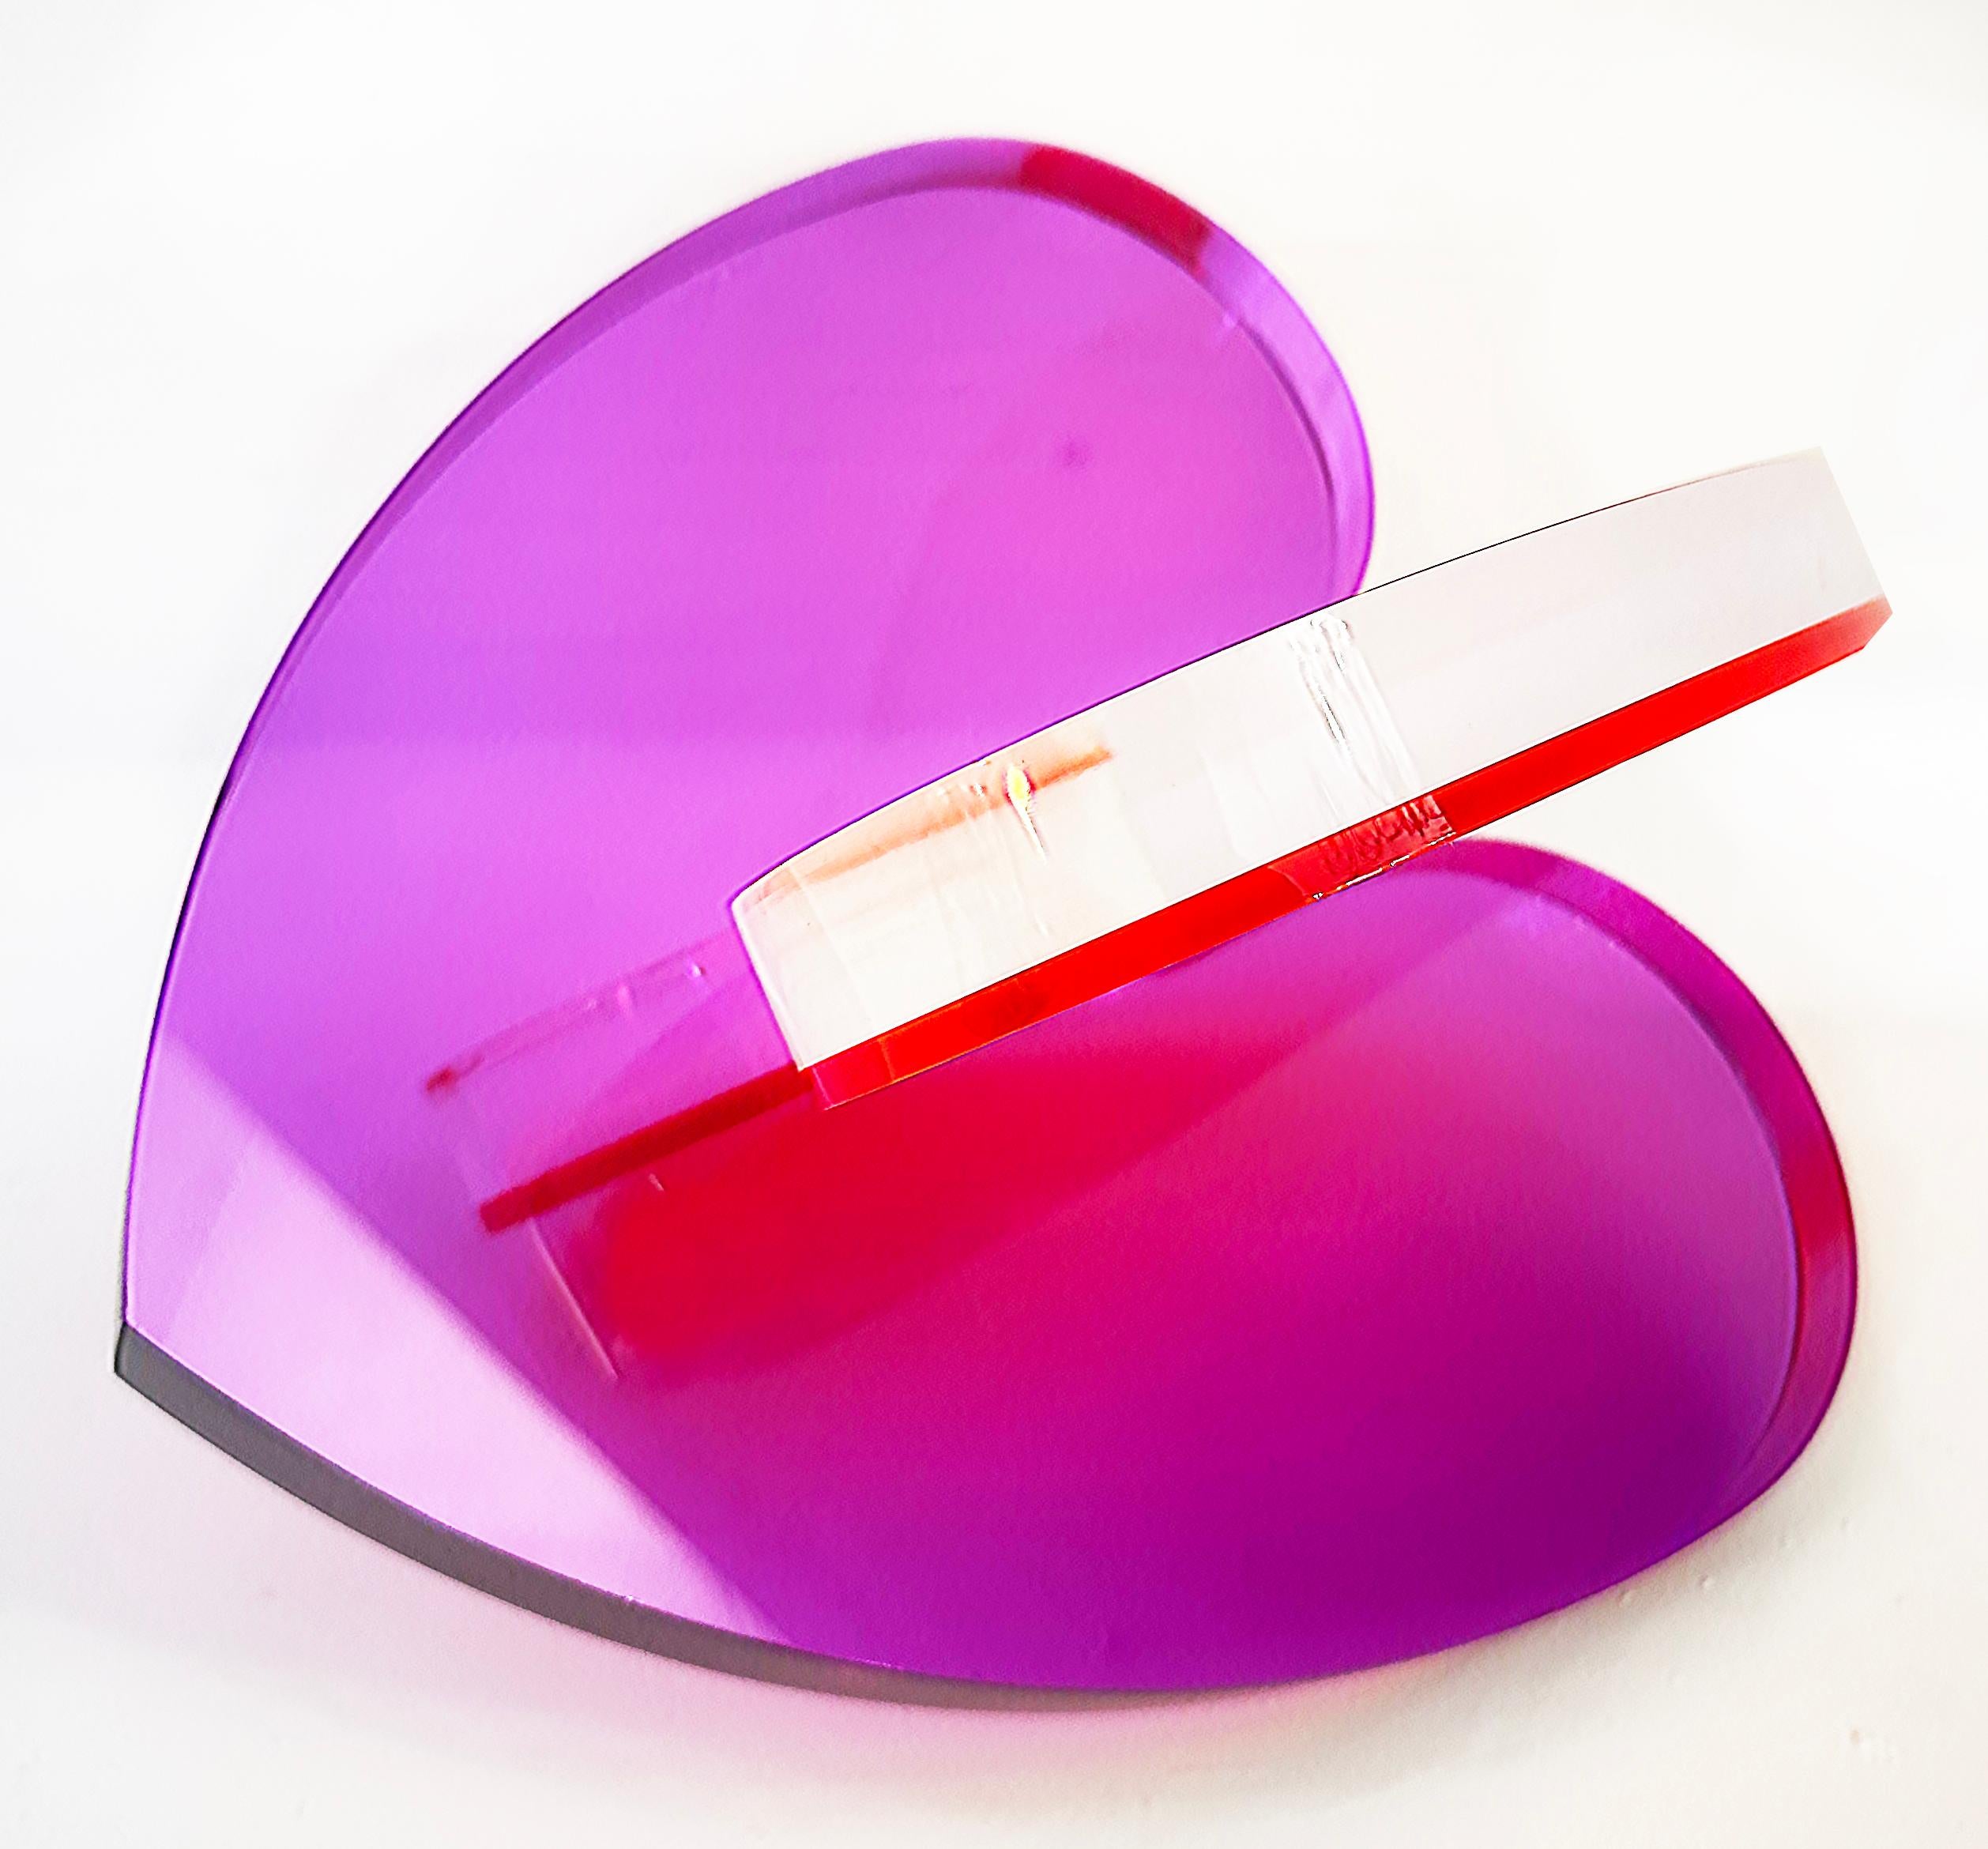 Lucite Interlocking Hearts  Sculpture by Michael Gitter Available in Many Colors 2